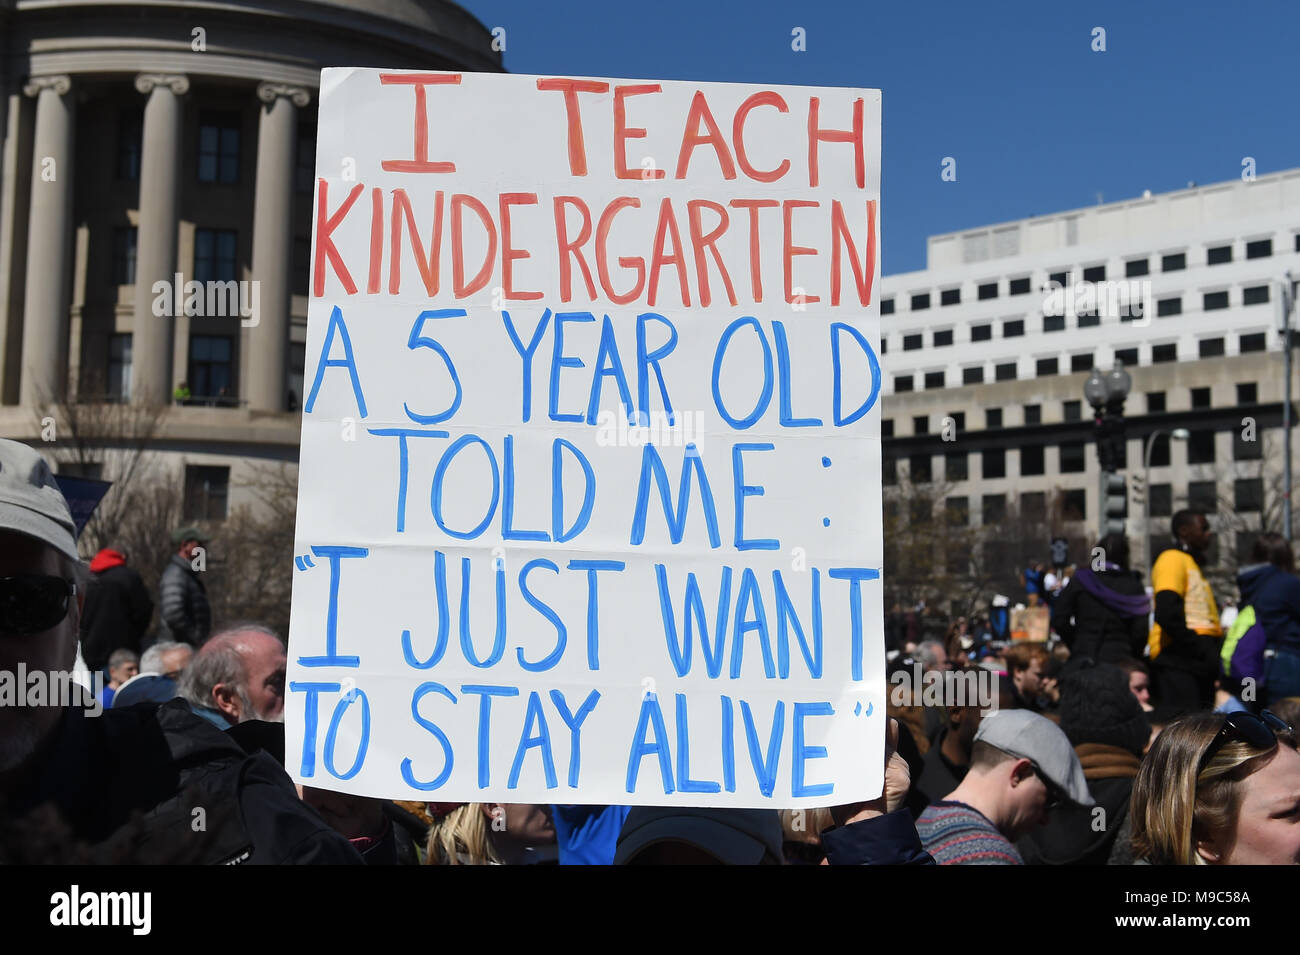 Washington, DC, USA. 24th Mar, 2018. A teacher protesting holds up a sign asking to protect children during the March for your Lives protest and march for gun control in the United States, held on Pennsylvania Avenue in Washington, DC. Credit: csm/Alamy Live News Stock Photo